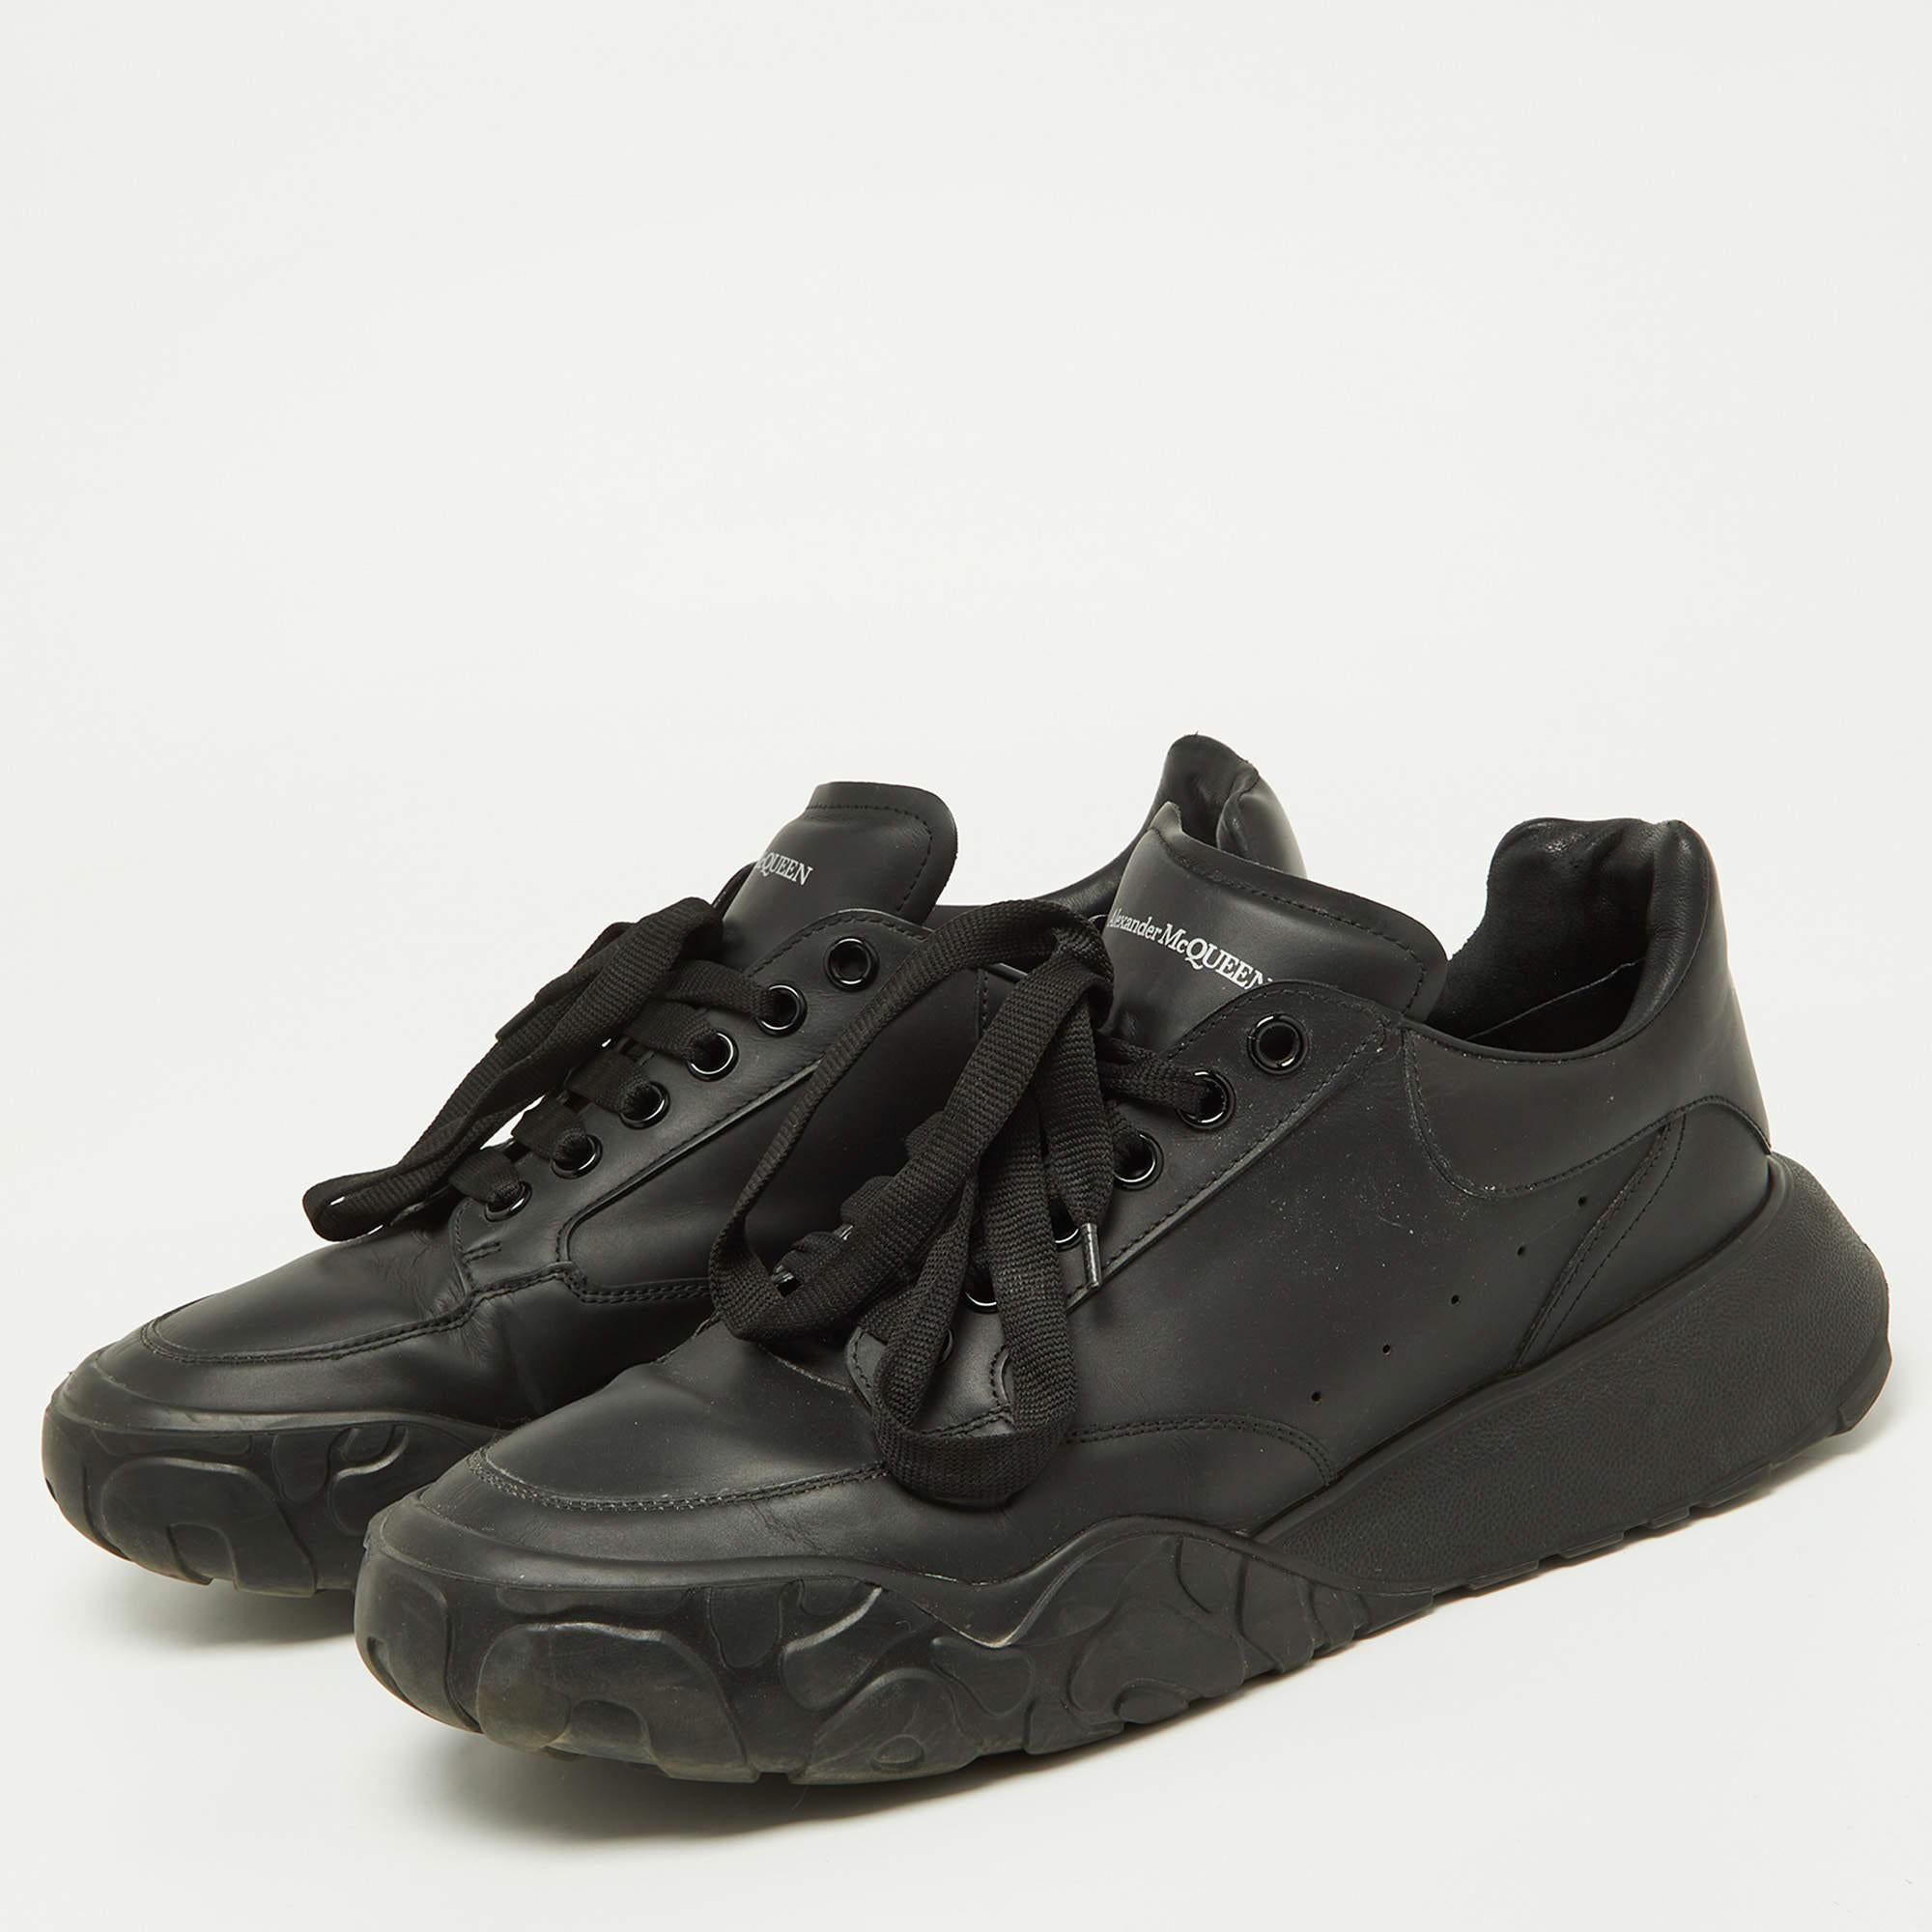 One's wardrobe is incomplete without a good pair of sneakers. Offering the best of style and ease, these Alexander McQueen low-top sneakers come crafted from leather and have round toes, lace-ups on the vamps, statement soles, and the label on the